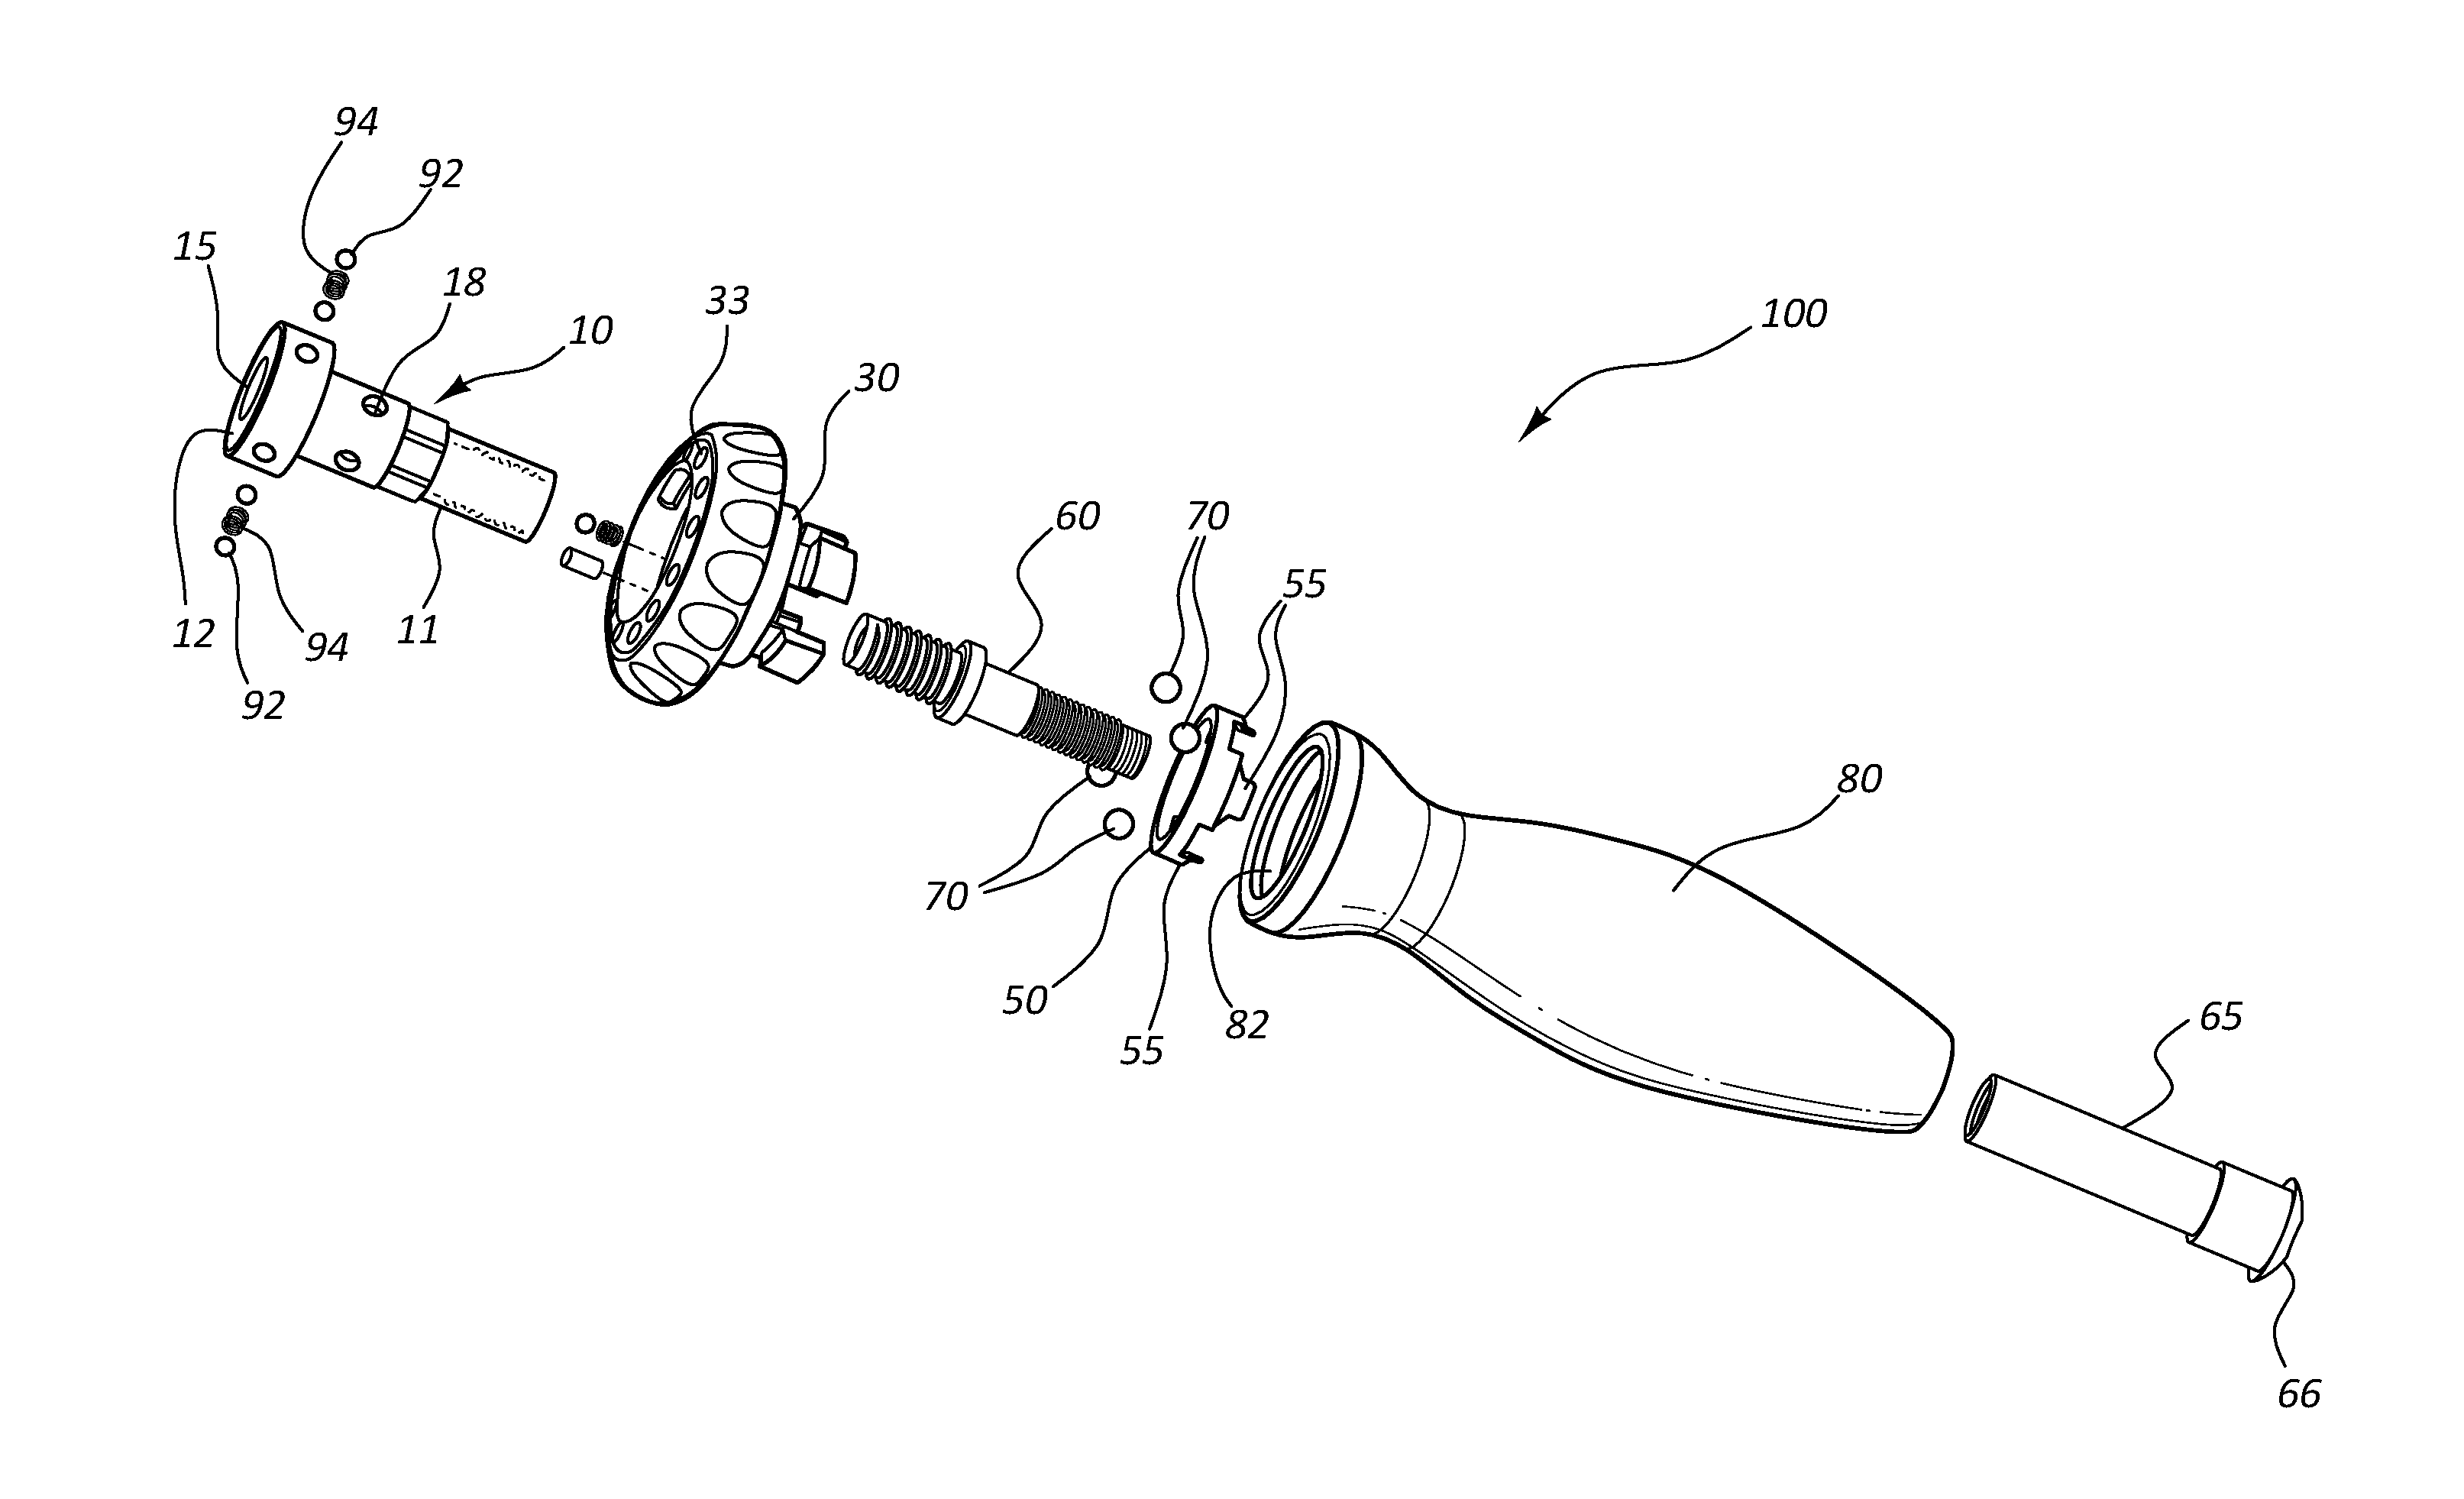 Surgical Instrument Adapter with Highly Secure Locking Shaft Mechanism